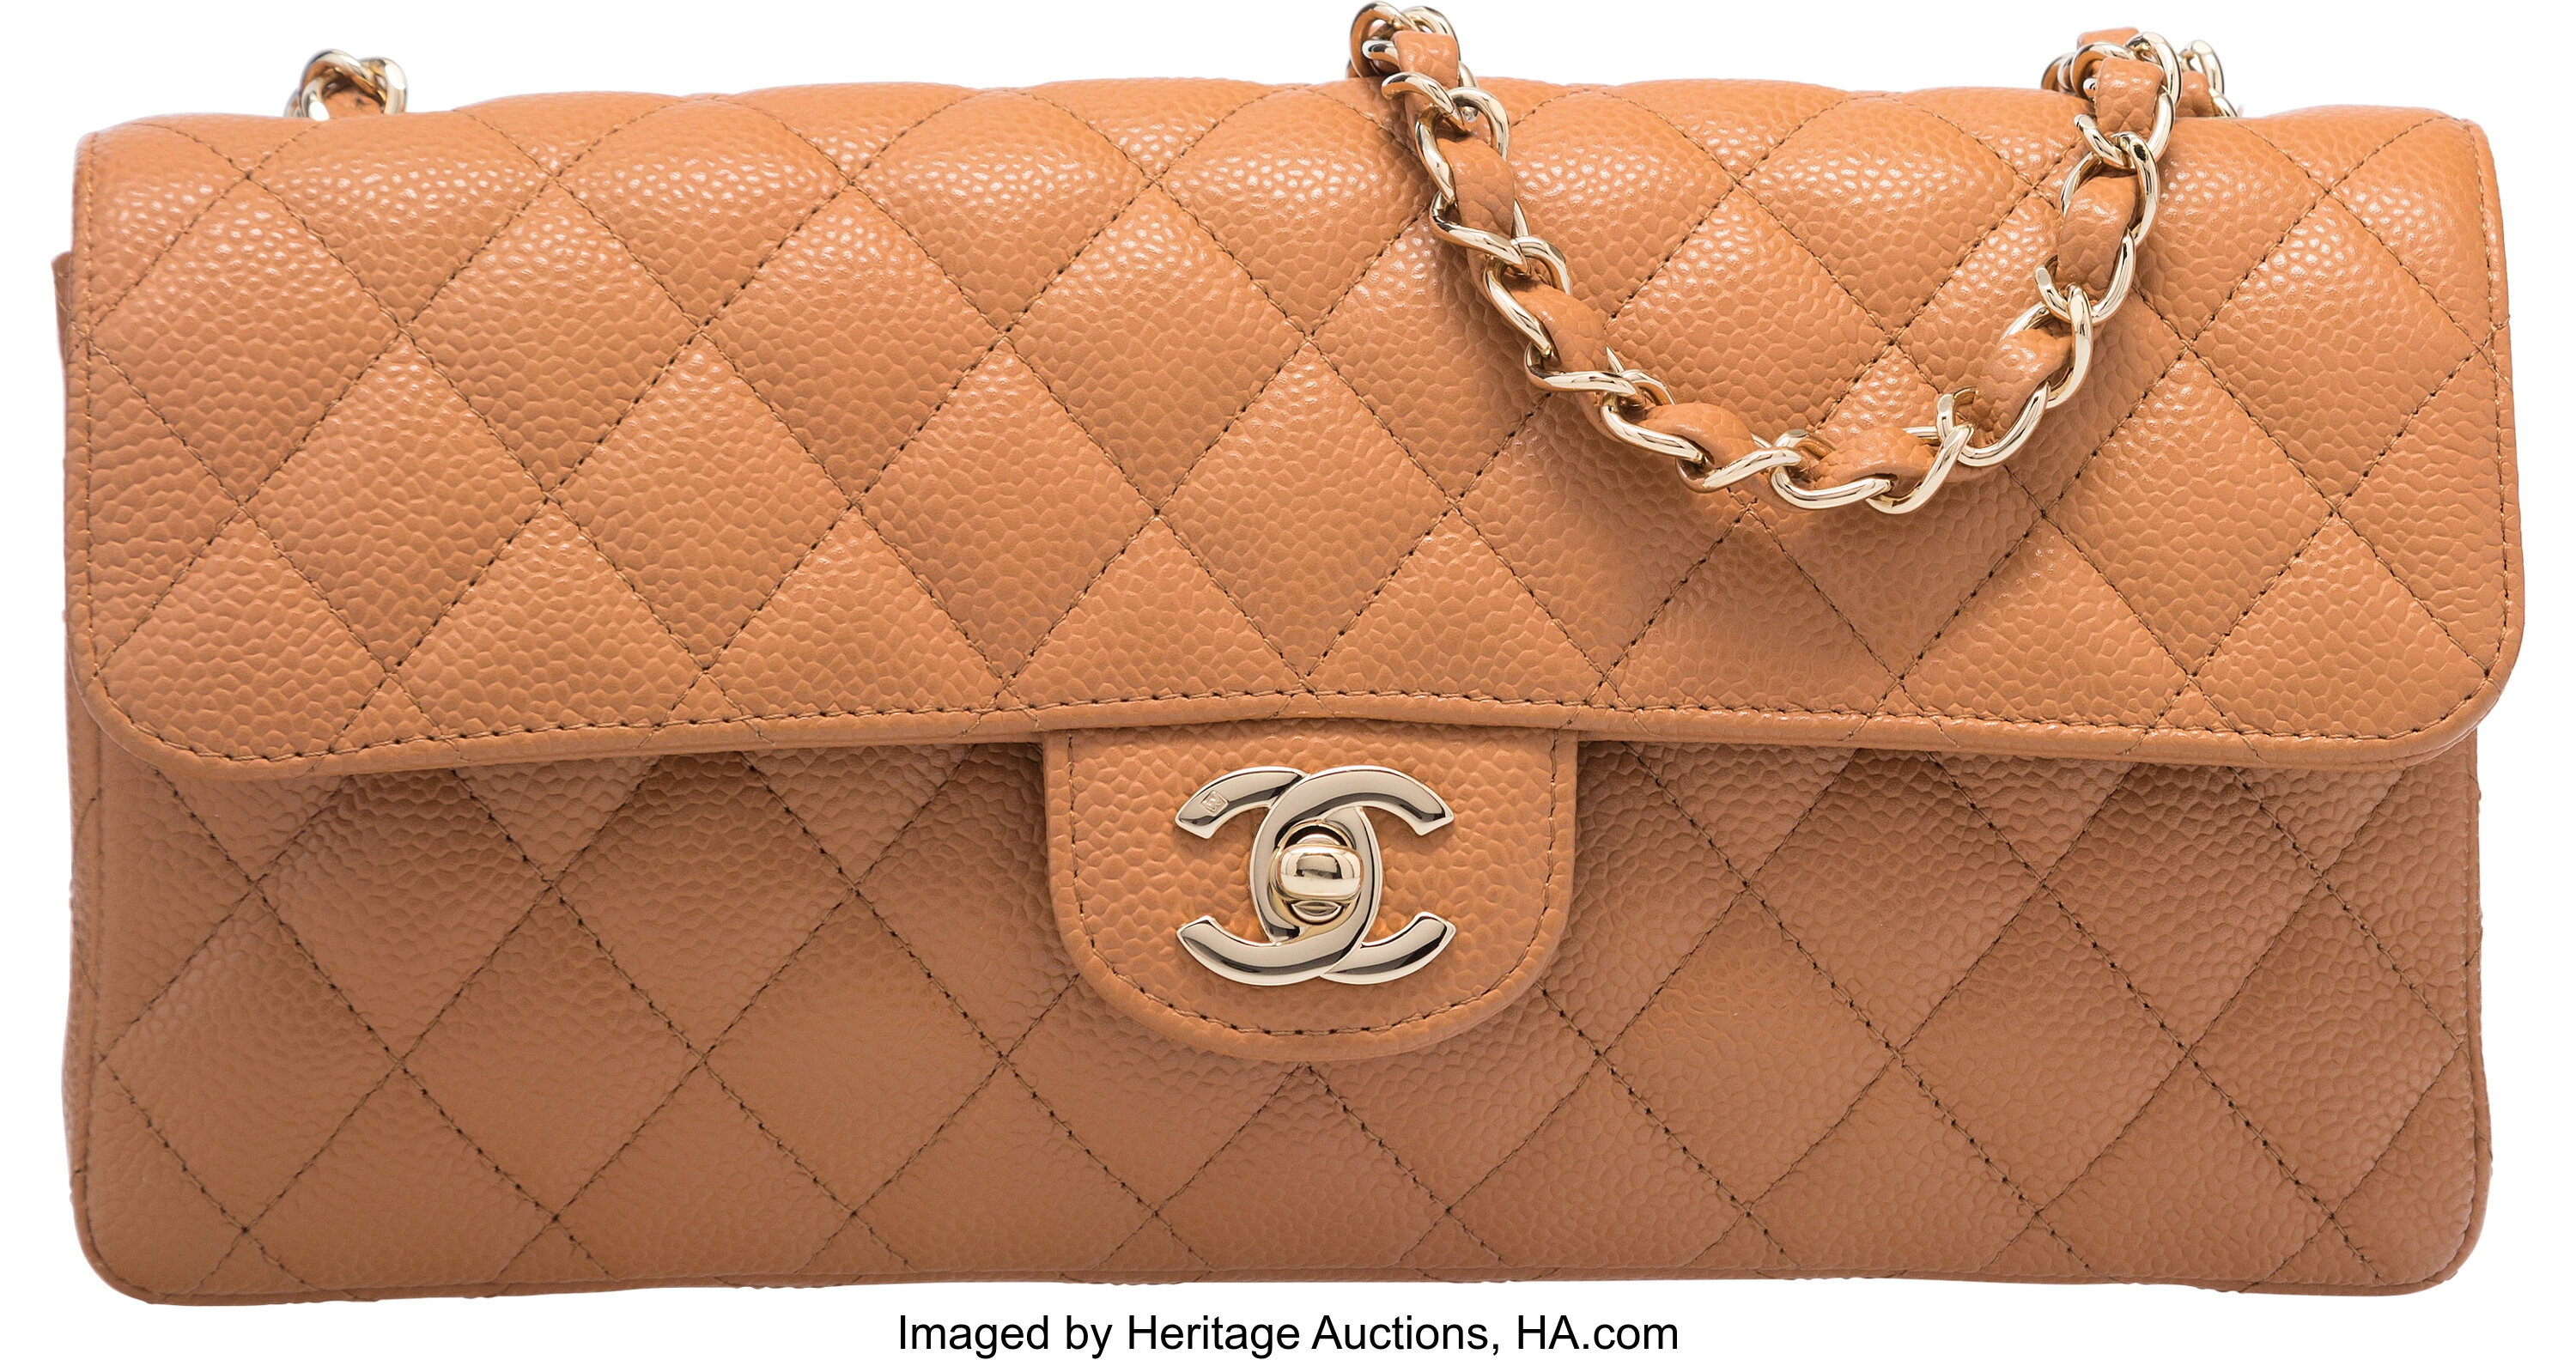 CHANEL Lambskin Quilted East West Flap Black 75025